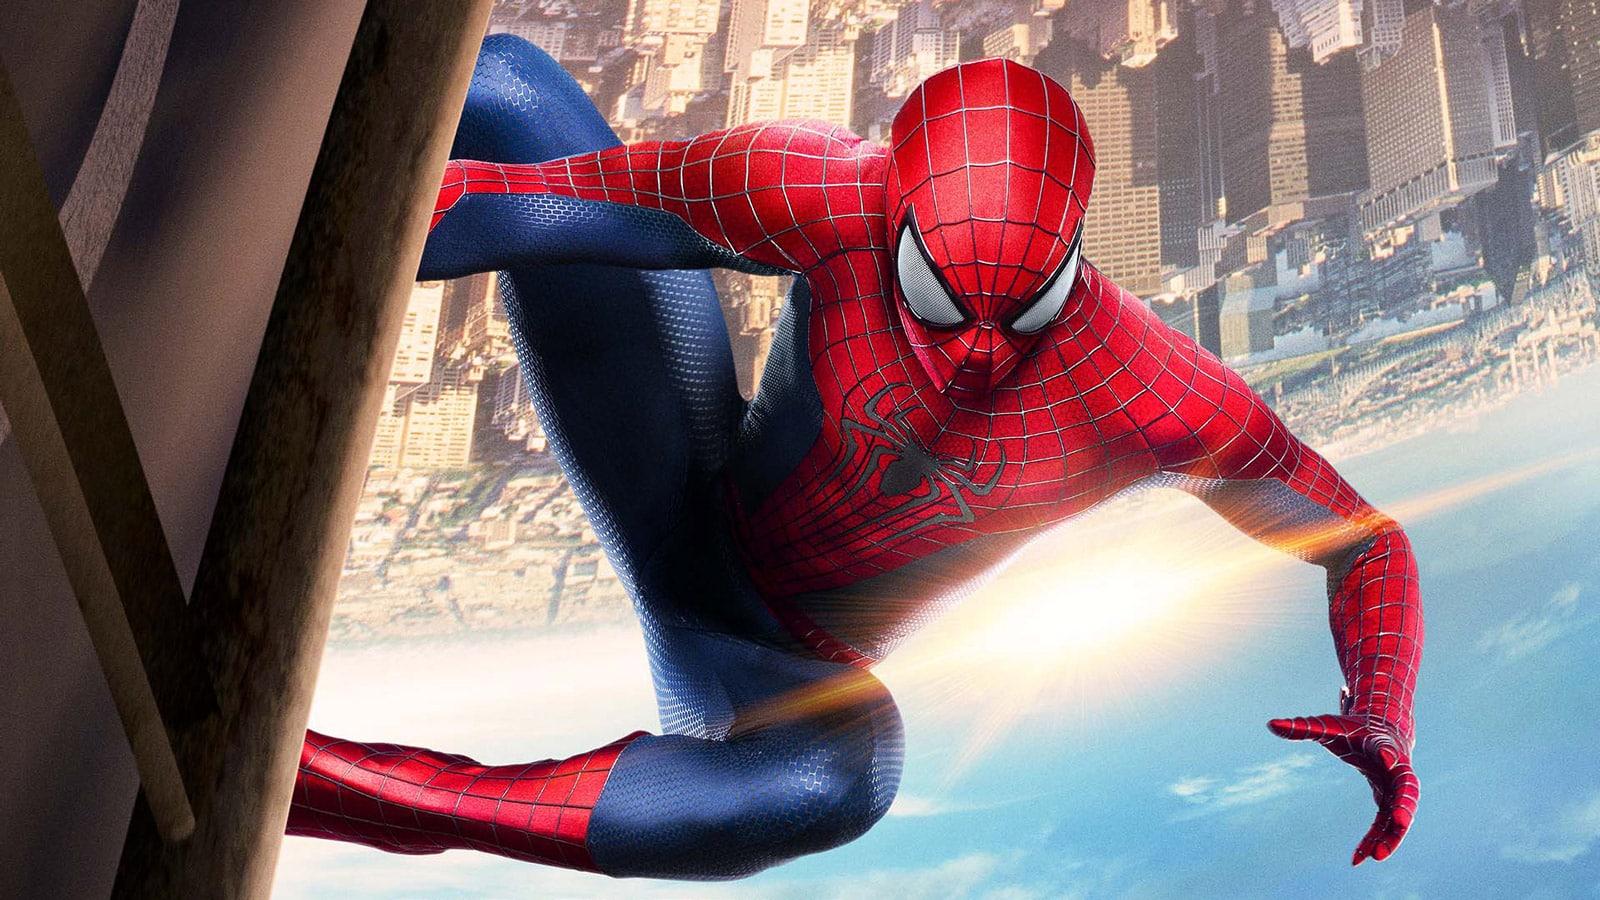 the amazing spider-man over the city